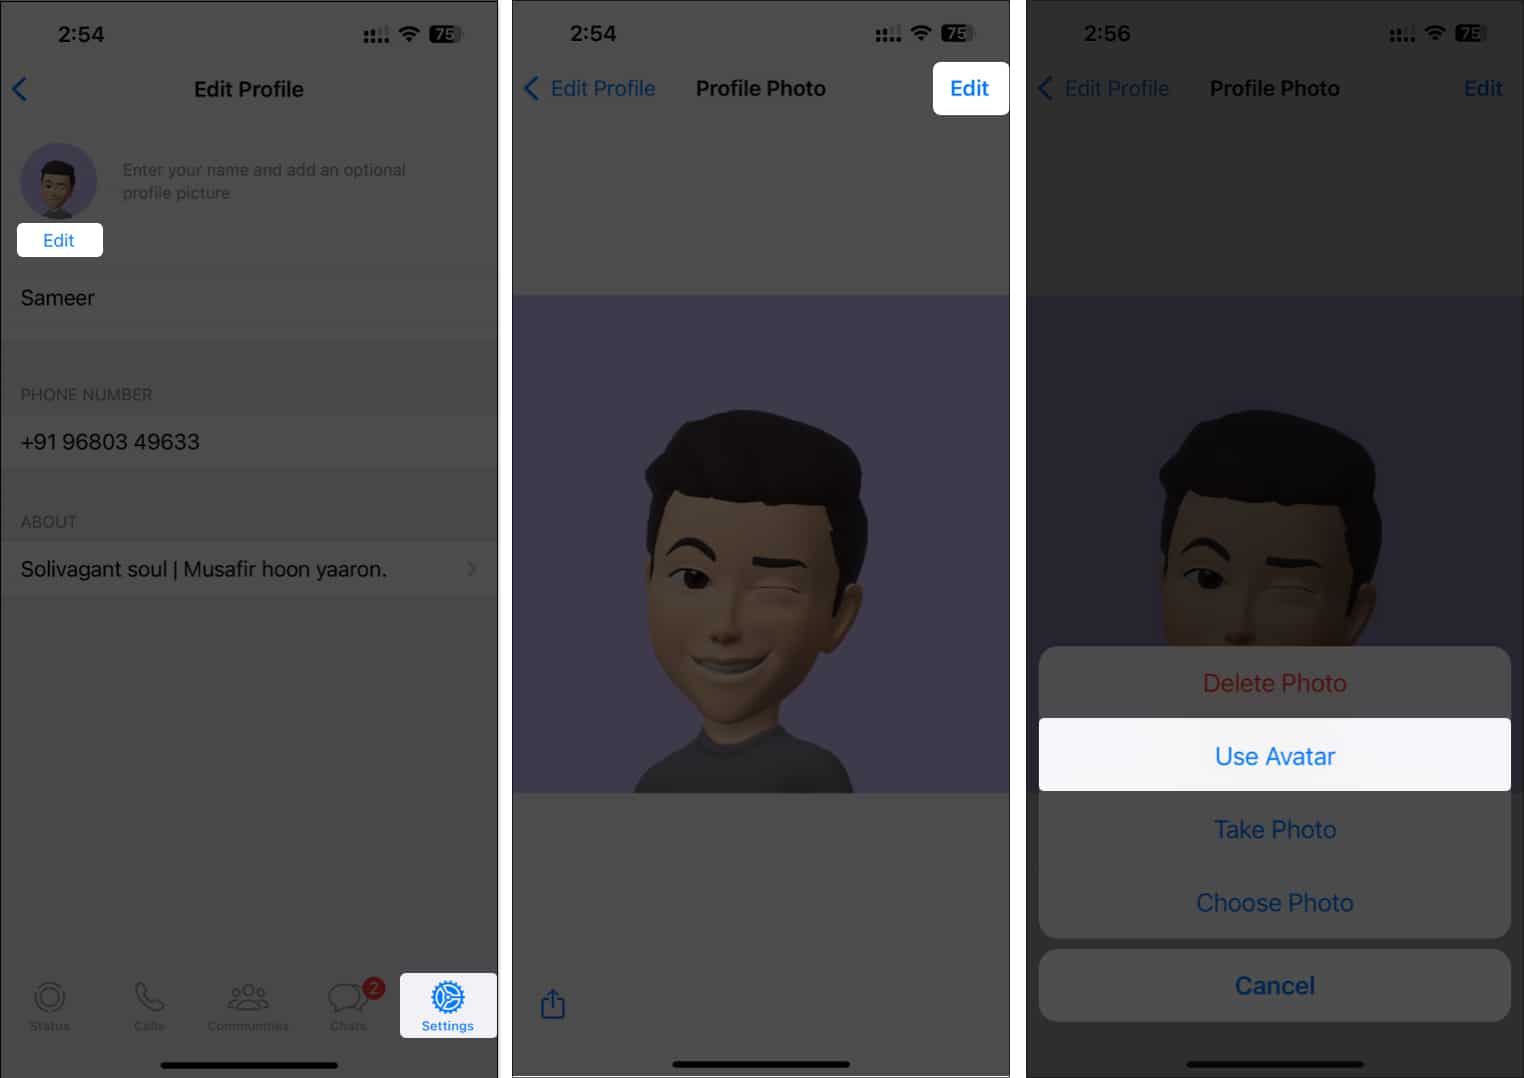 Tap use Avatar to make your WhatsApp avatar your profile photo